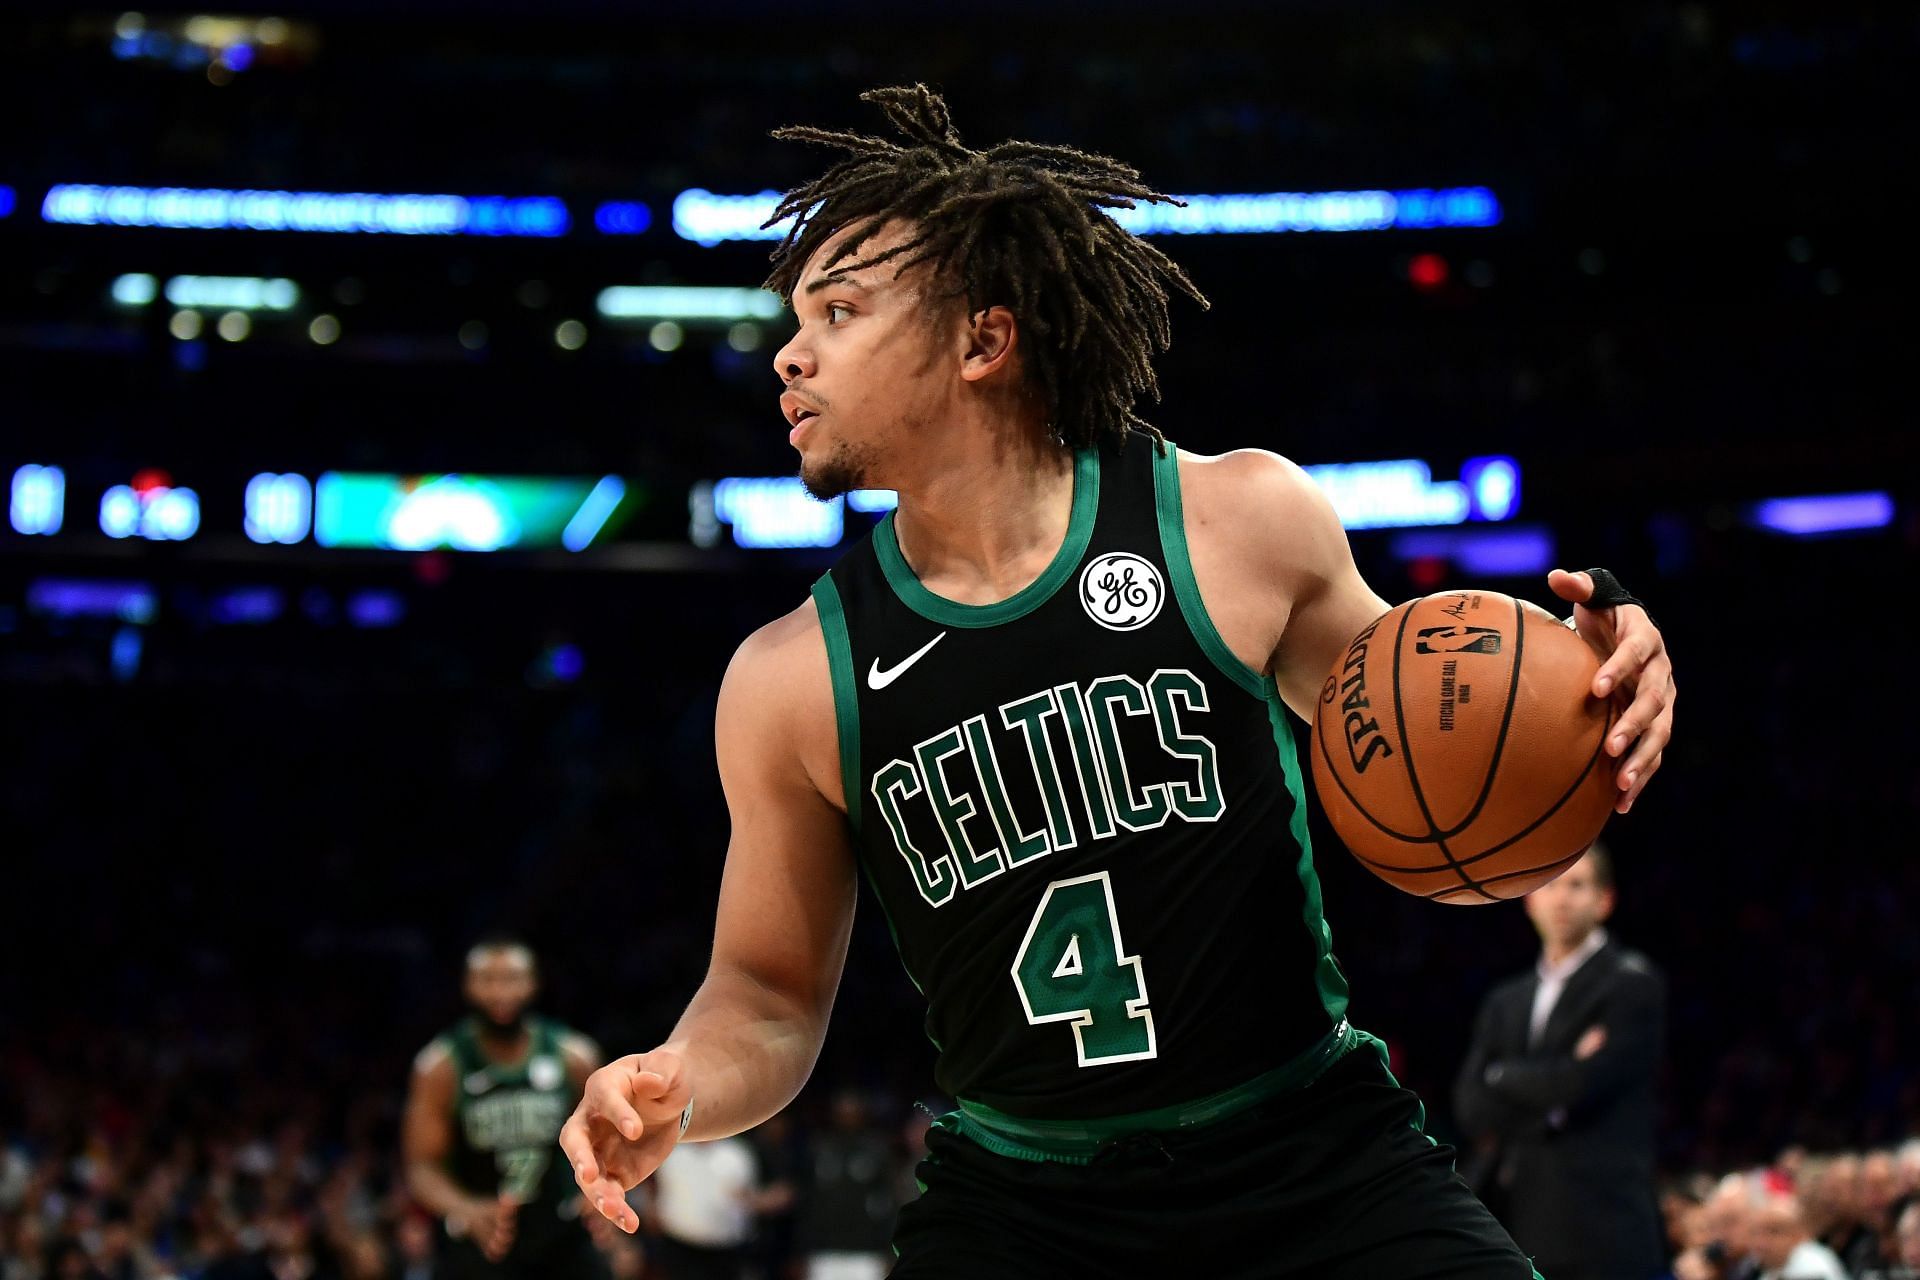 Carsen Edwards, shown here with the Boston Celtics, was recently passed by Zach Edey on the Purdue career scoring list.